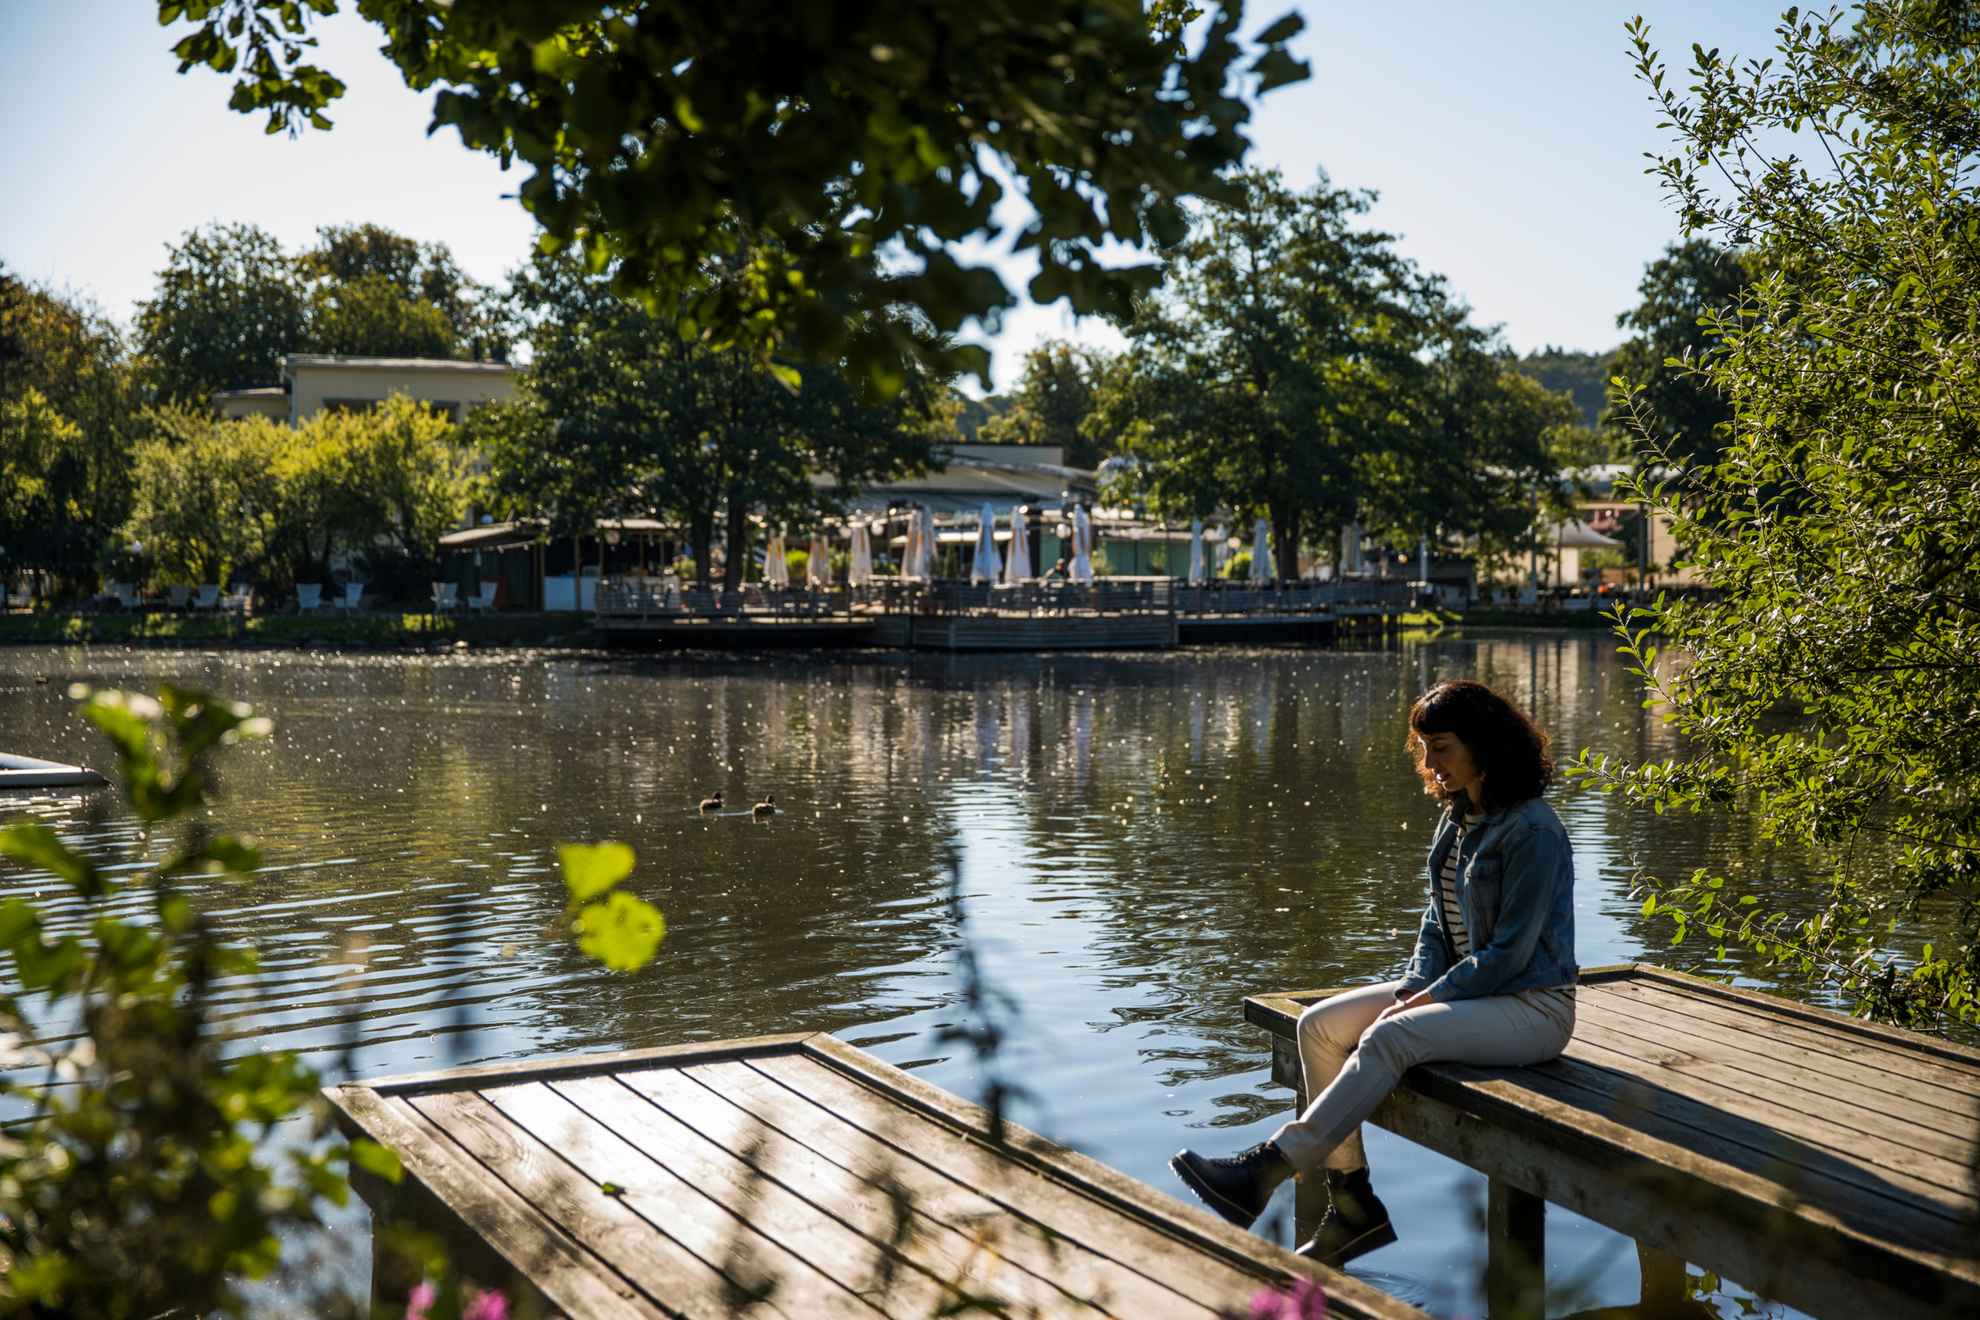 A woman sitting on a jetty next to a pond surrounded by greenery in a park. In the background you see an outdoor restaurant.